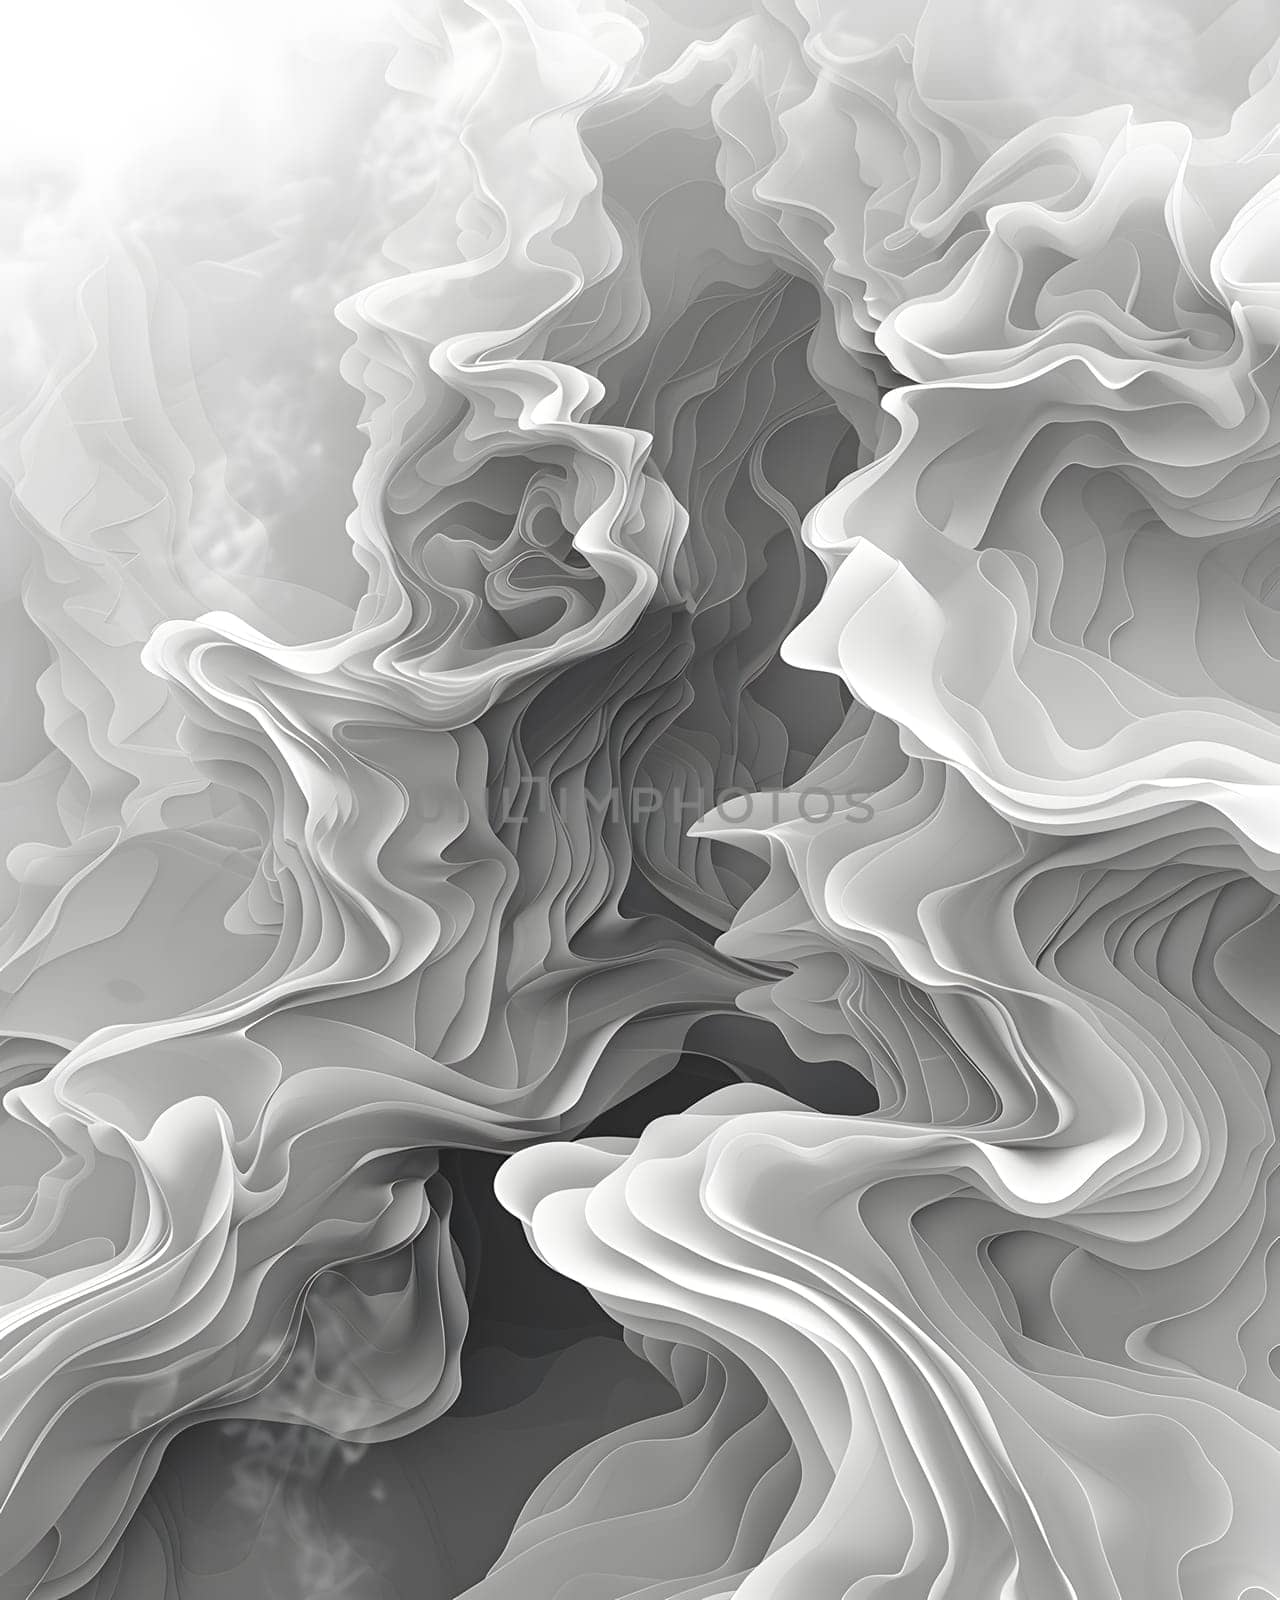 A monochrome photography of a swirling pattern resembling wind waves in liquid, with shades of grey and black creating a beautiful art of petallike shapes